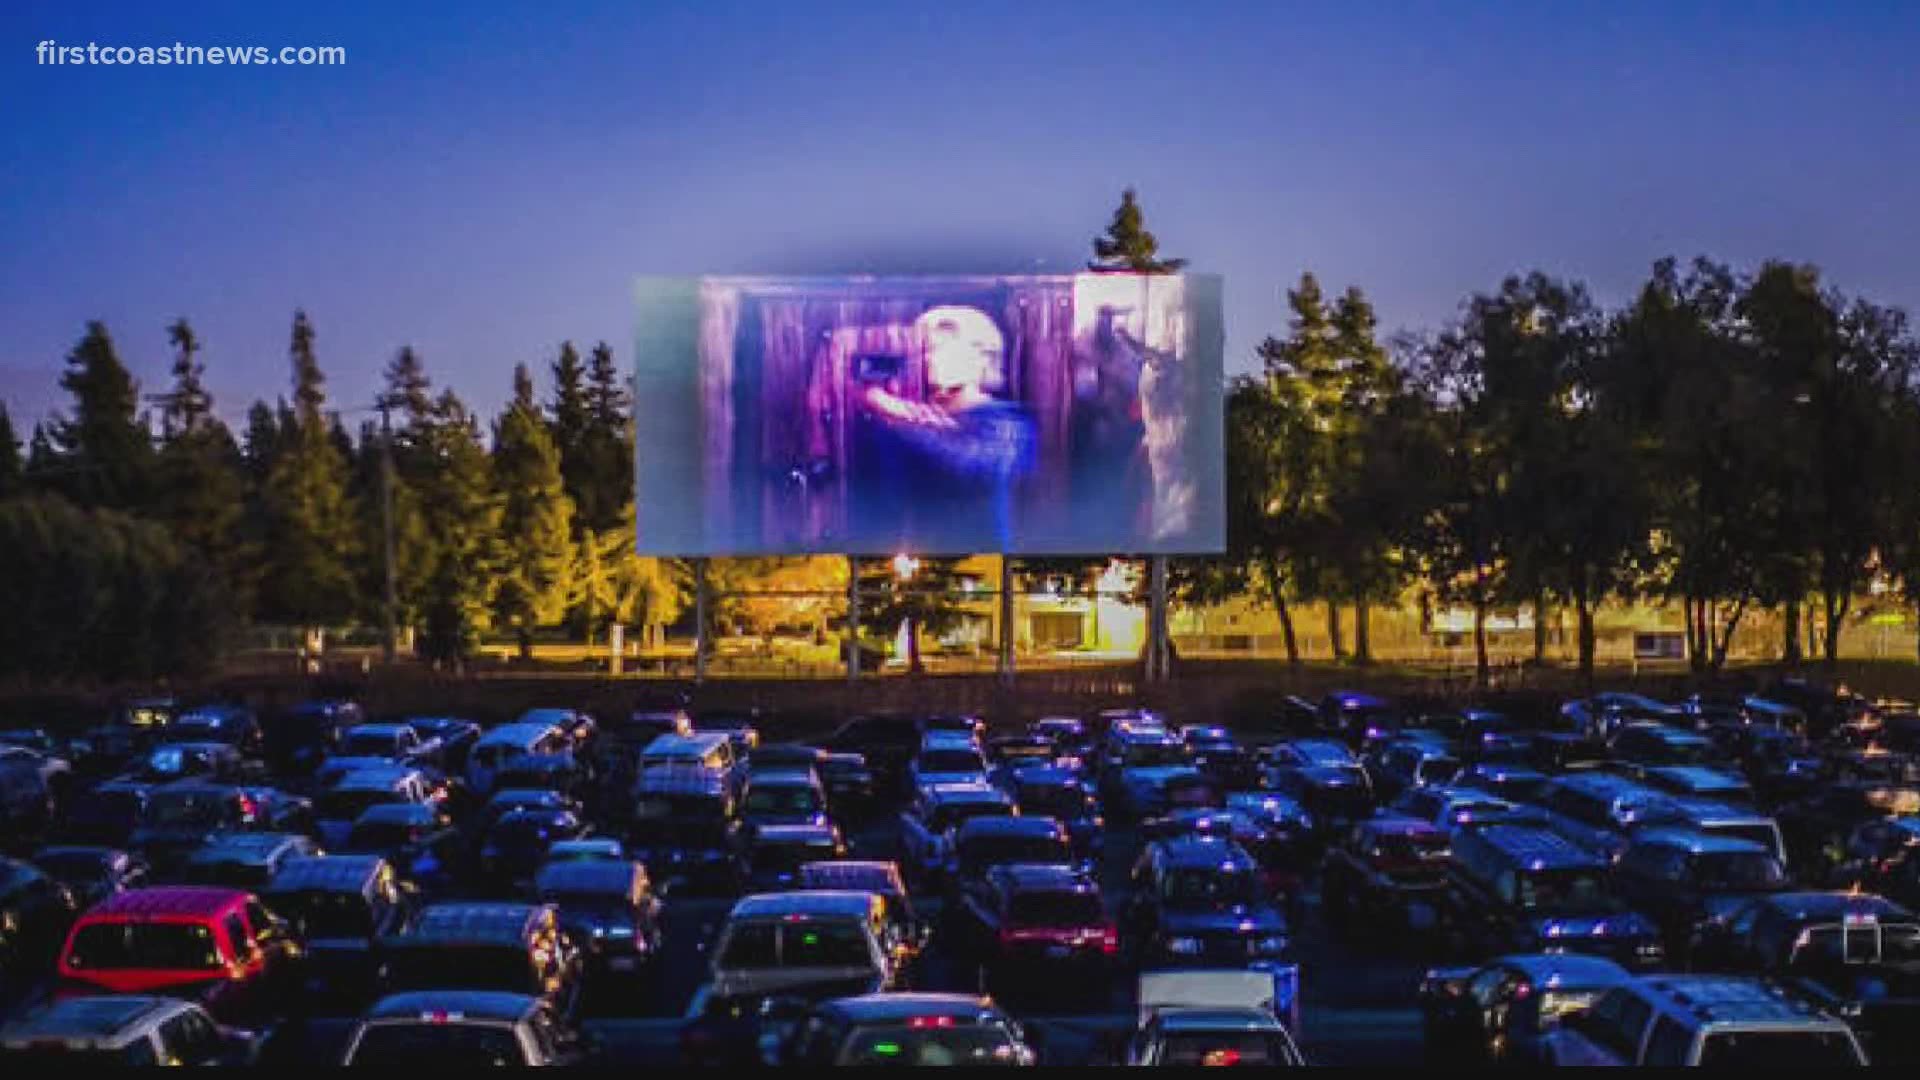 Walmart's drive-in tour will start in August and will run through October.